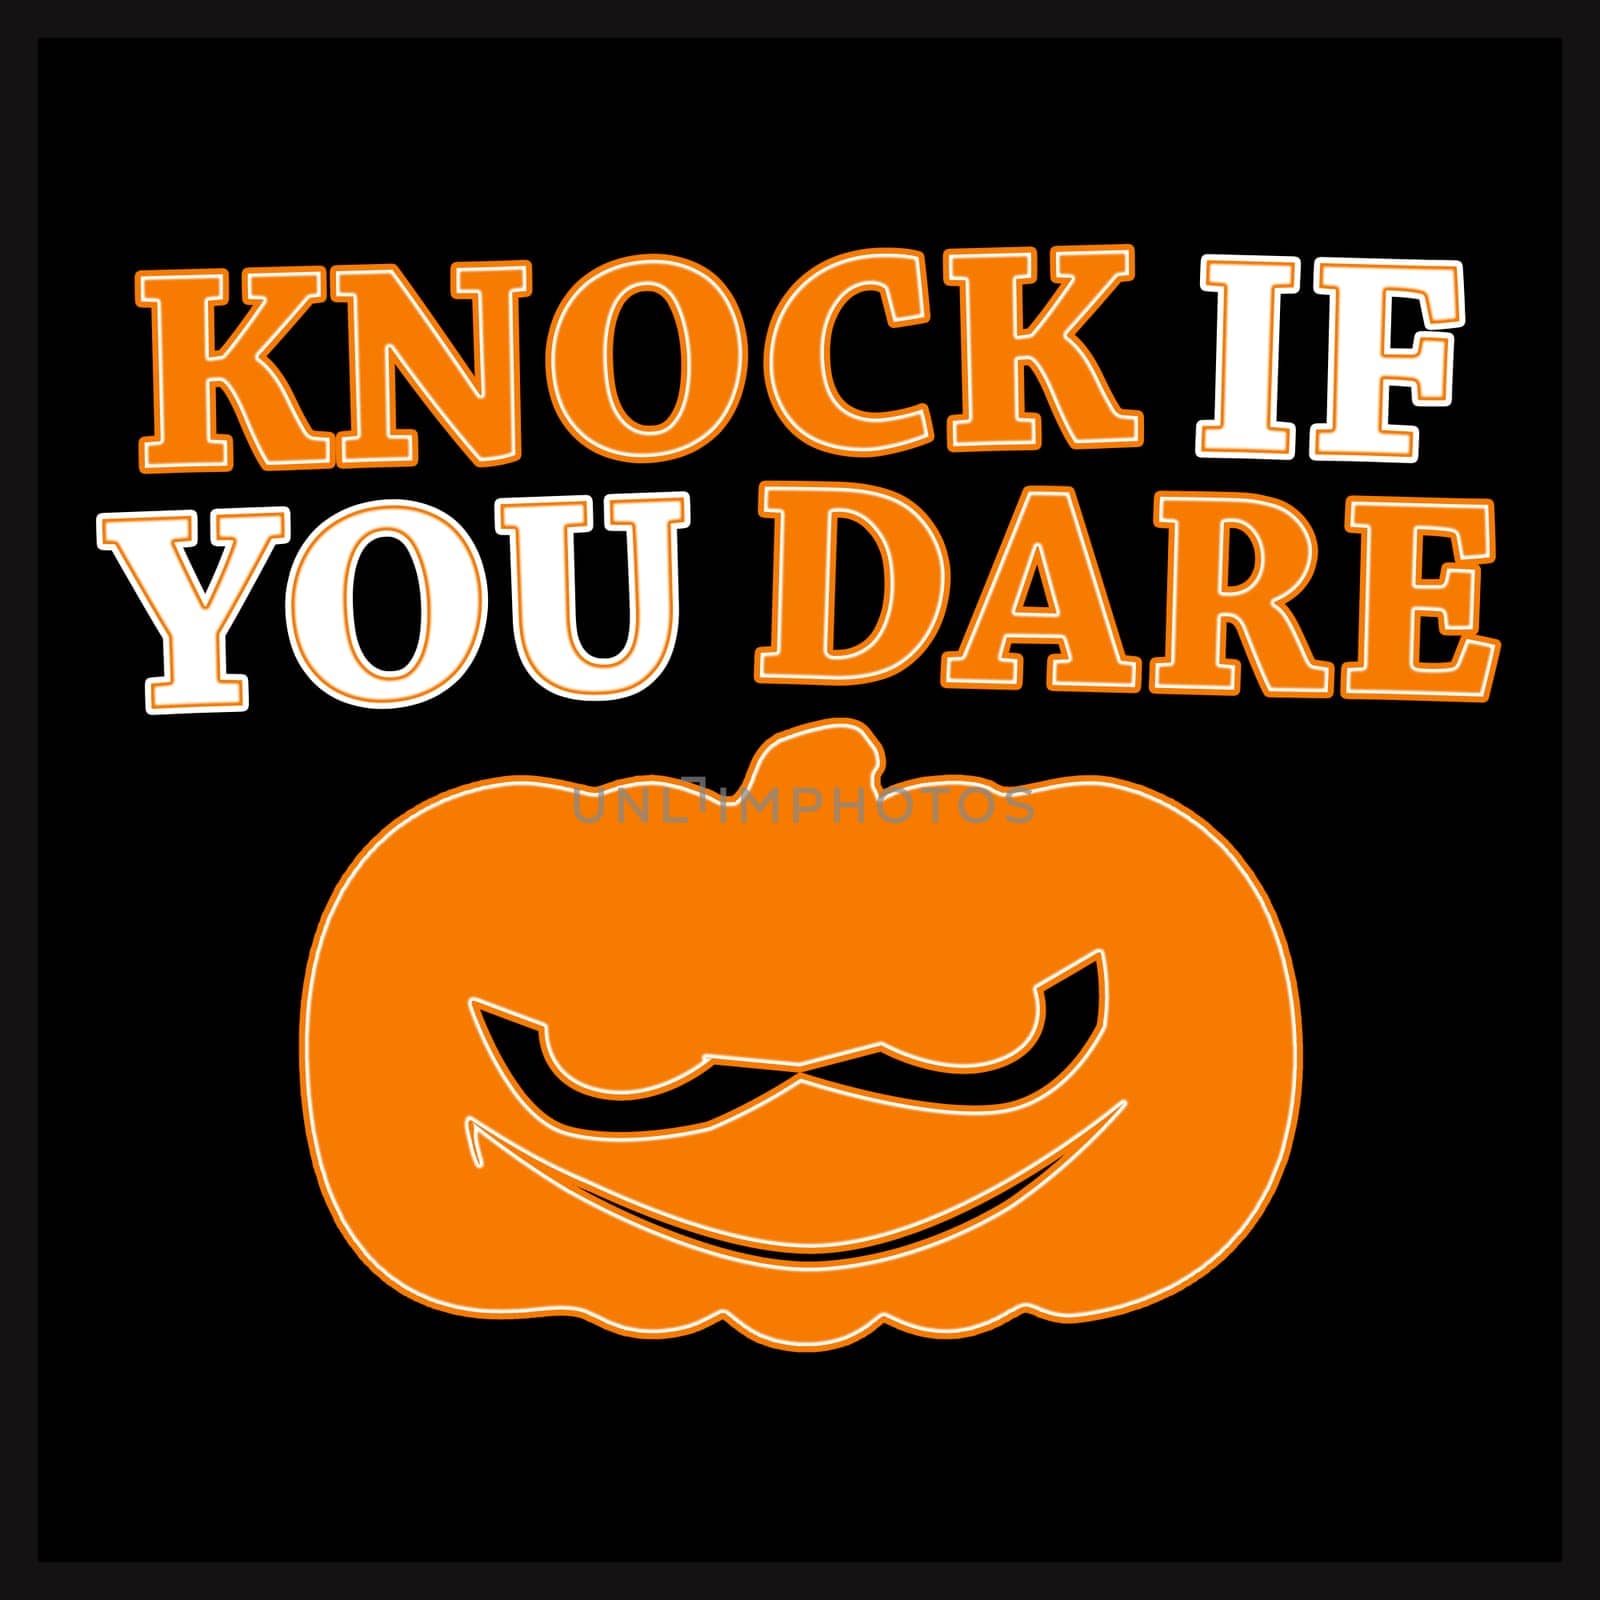 A halloween sign with the text "Knock if you dare".